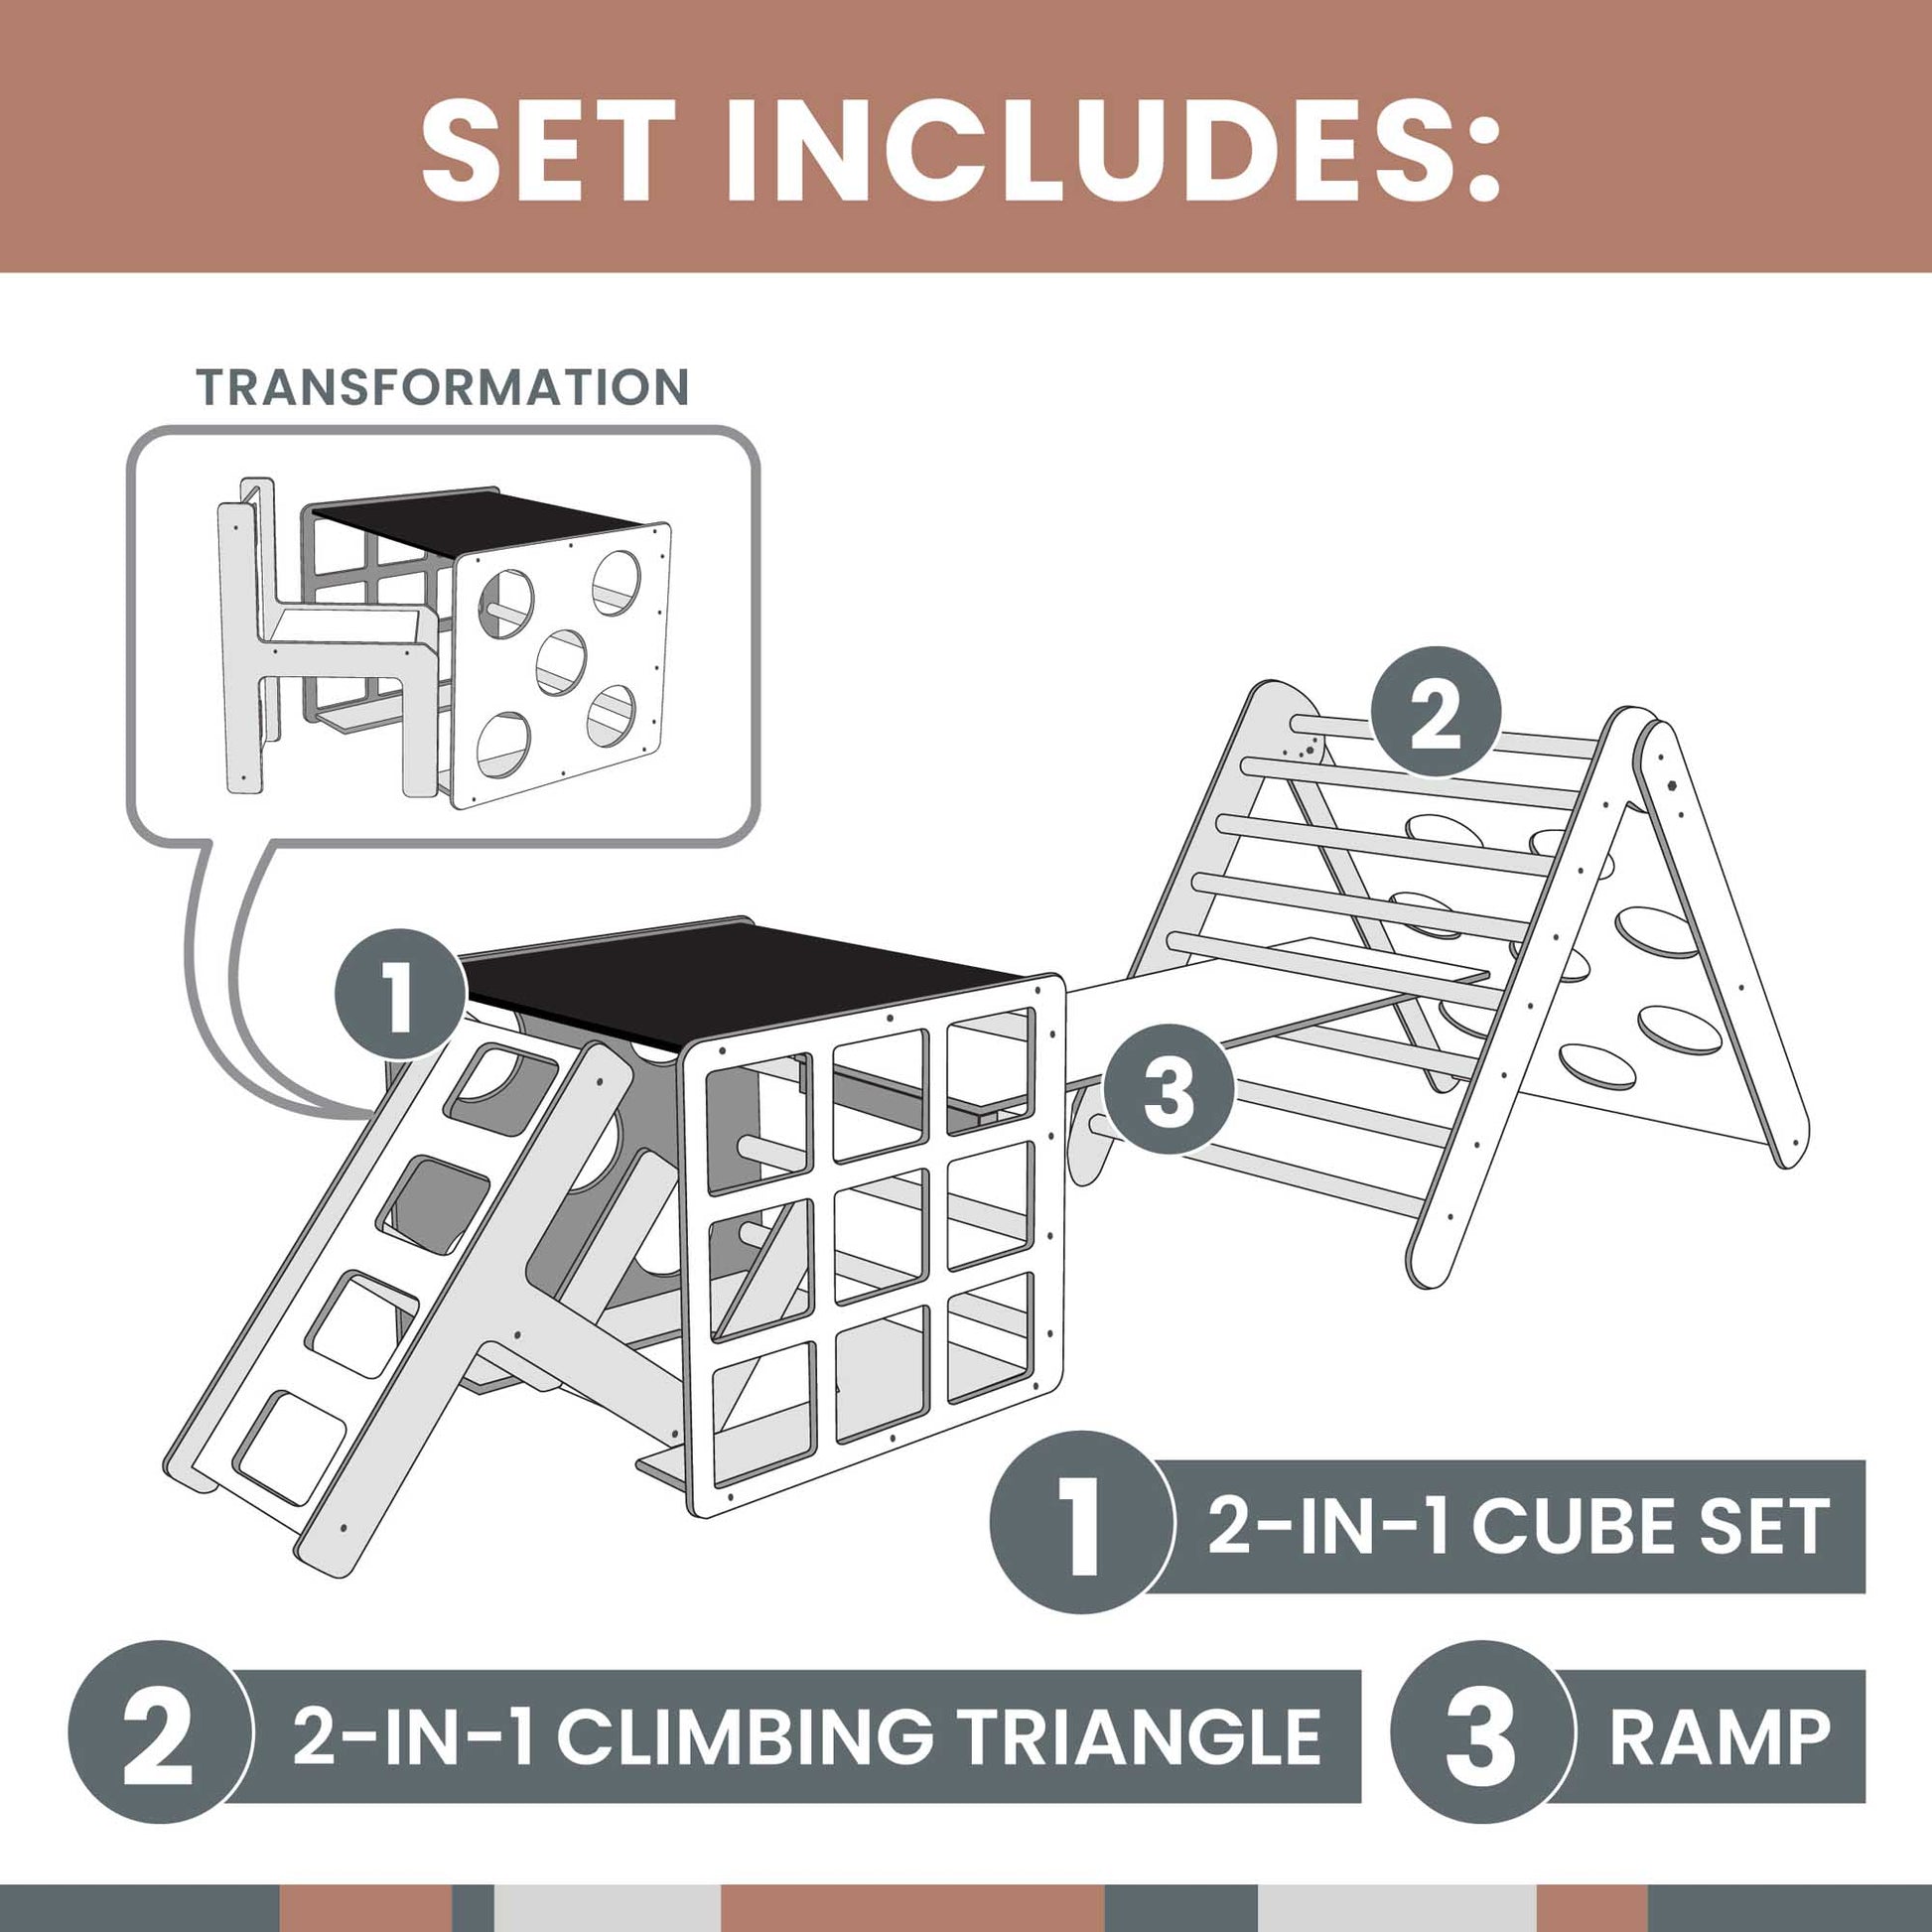 A Transformable triangle + climbing cube / table and chair  + a ramp for an activity cube, providing climbing fun for children.